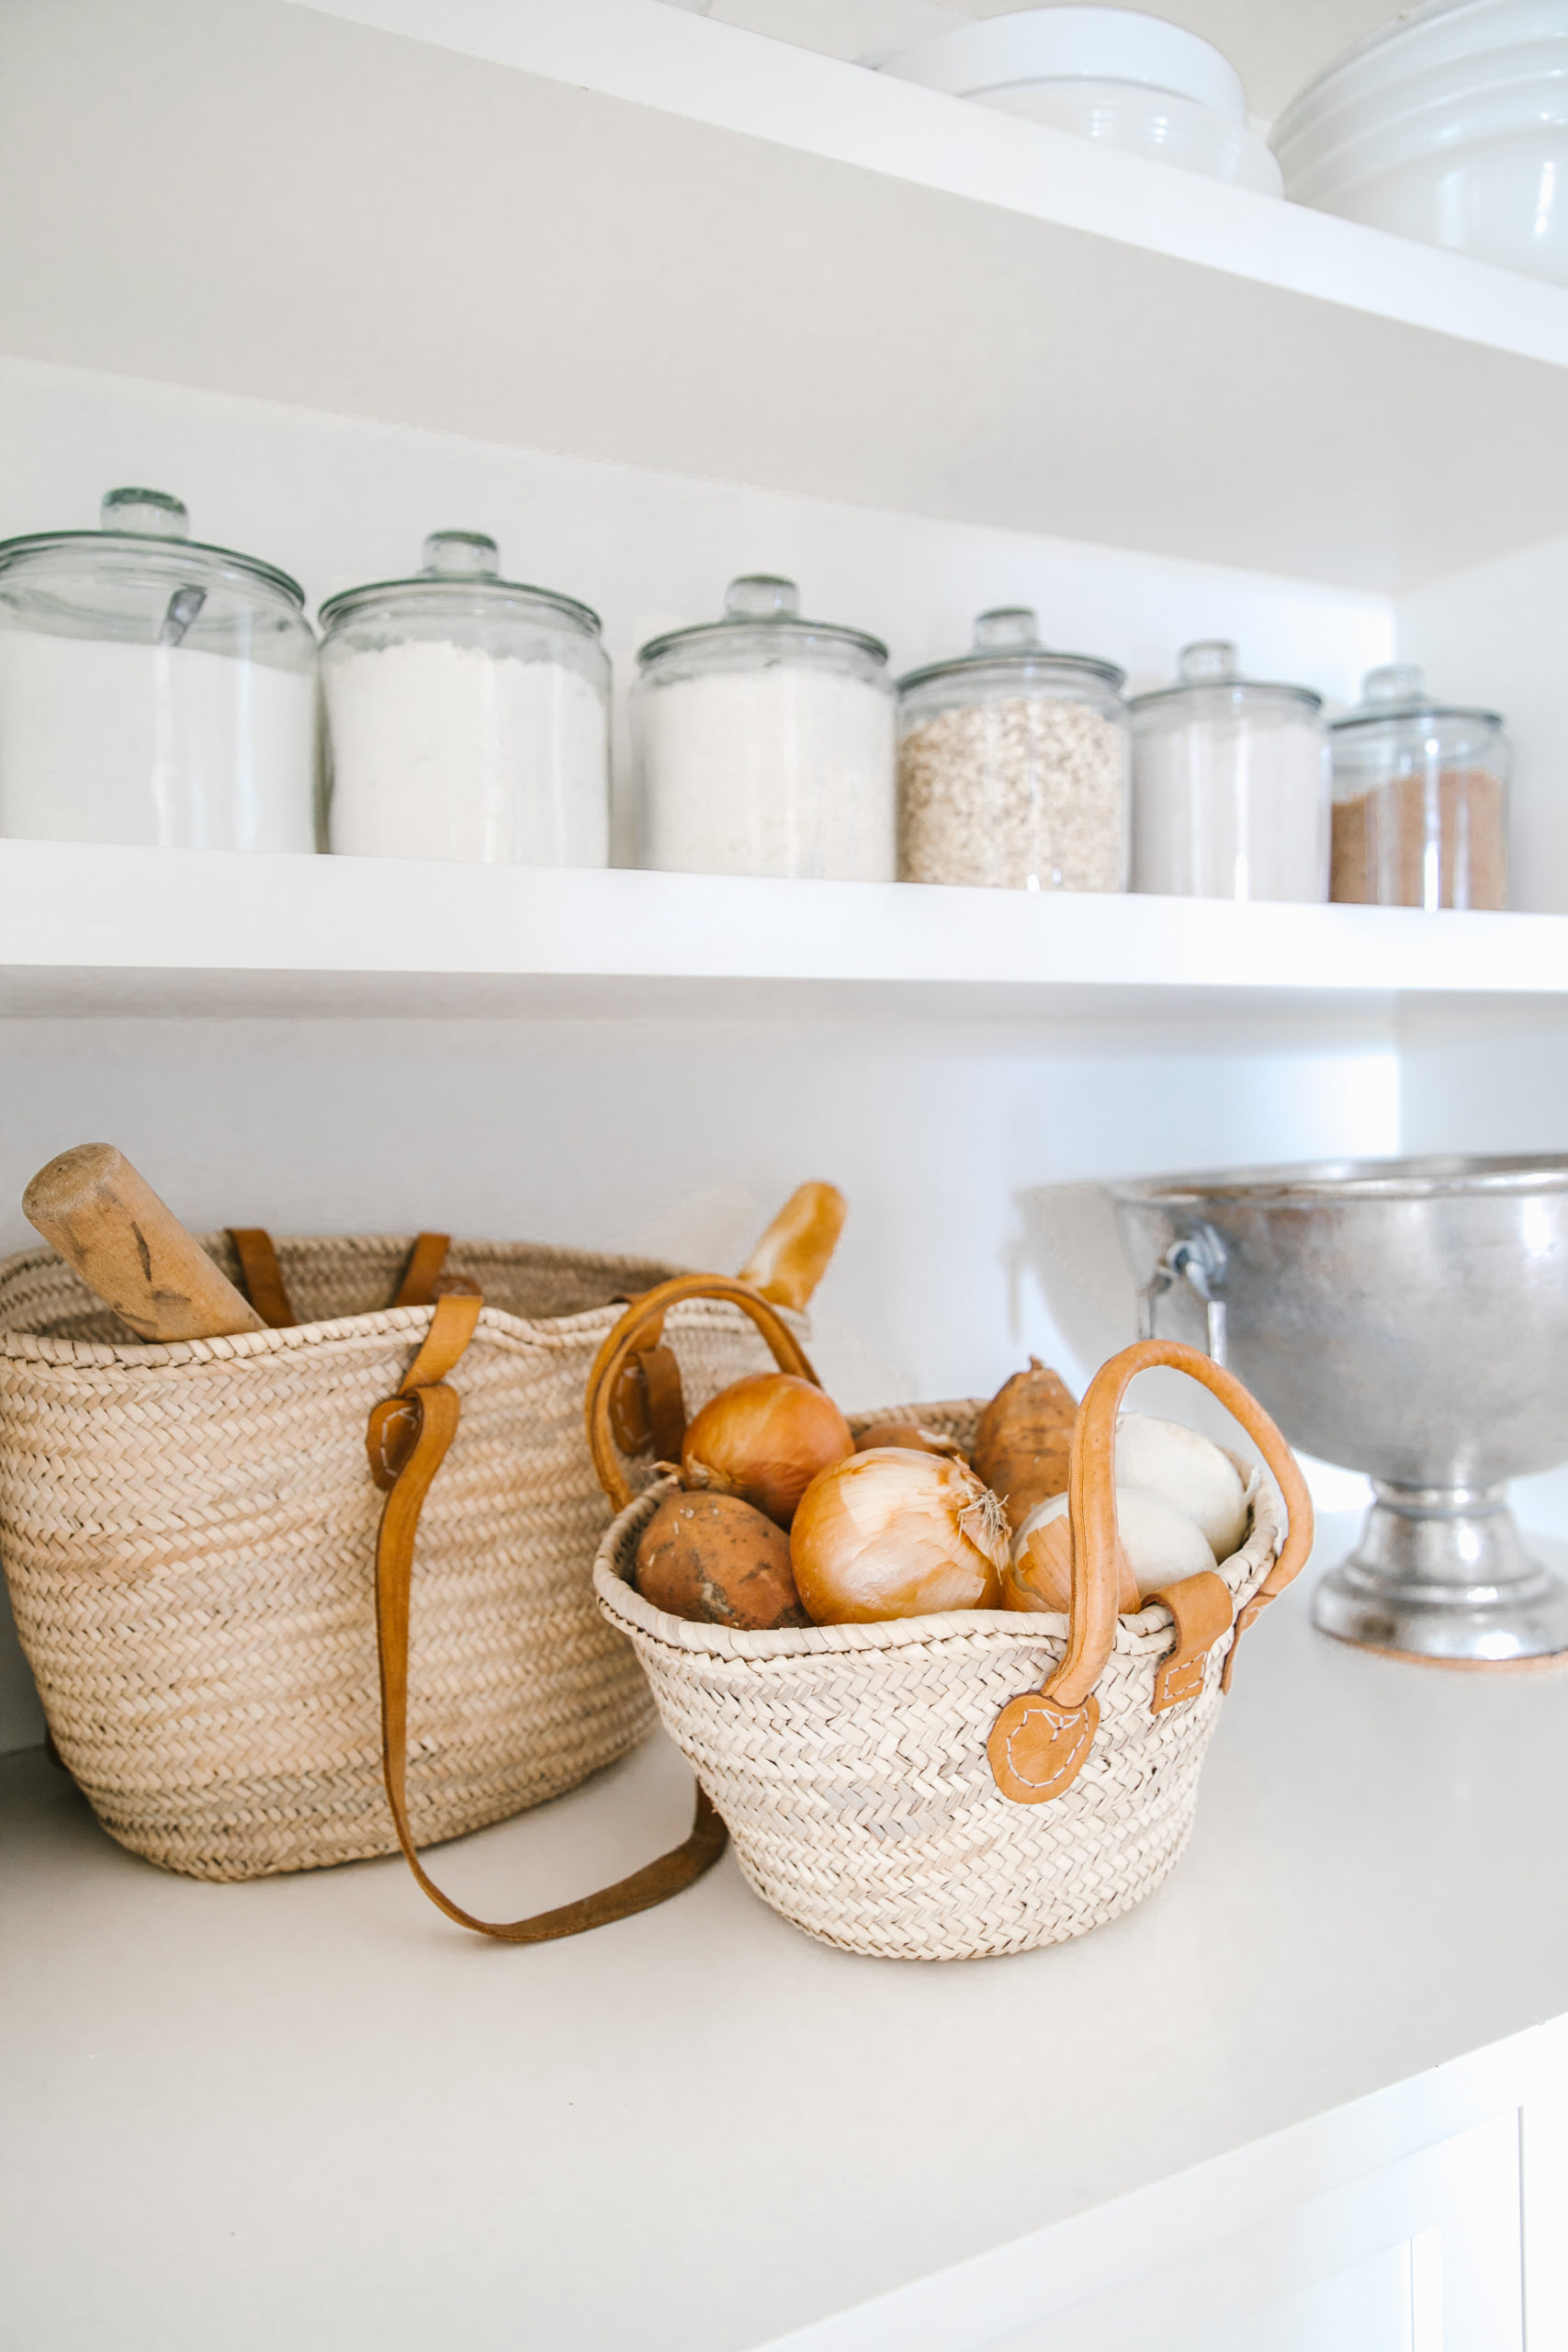 Our white butler's pantry reveal with an arched doorway, vintage chandelier lighting and open shelving with these white bowls, baskets and glass jars for storage!